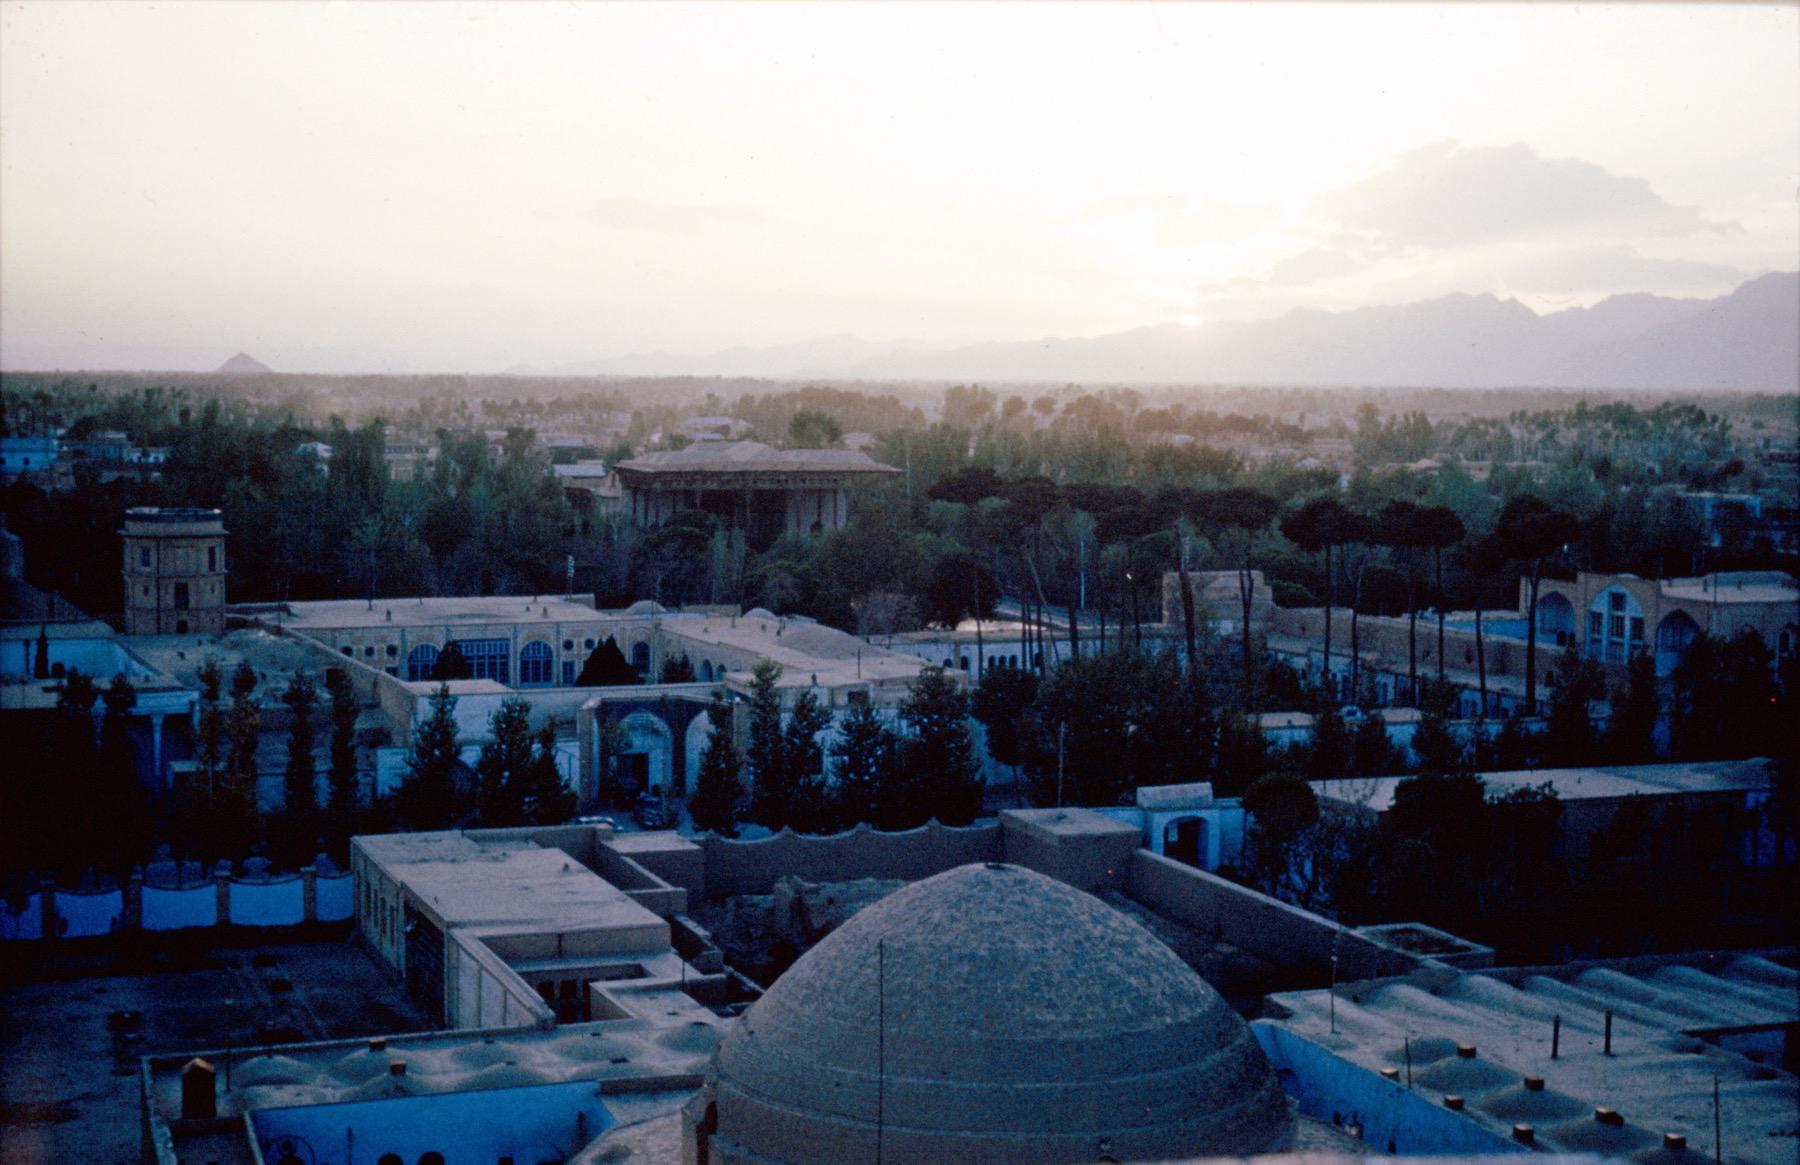 General view looking west from Ali Qapu with Tohid Khaneh in foreground and Chihil Sutun in background